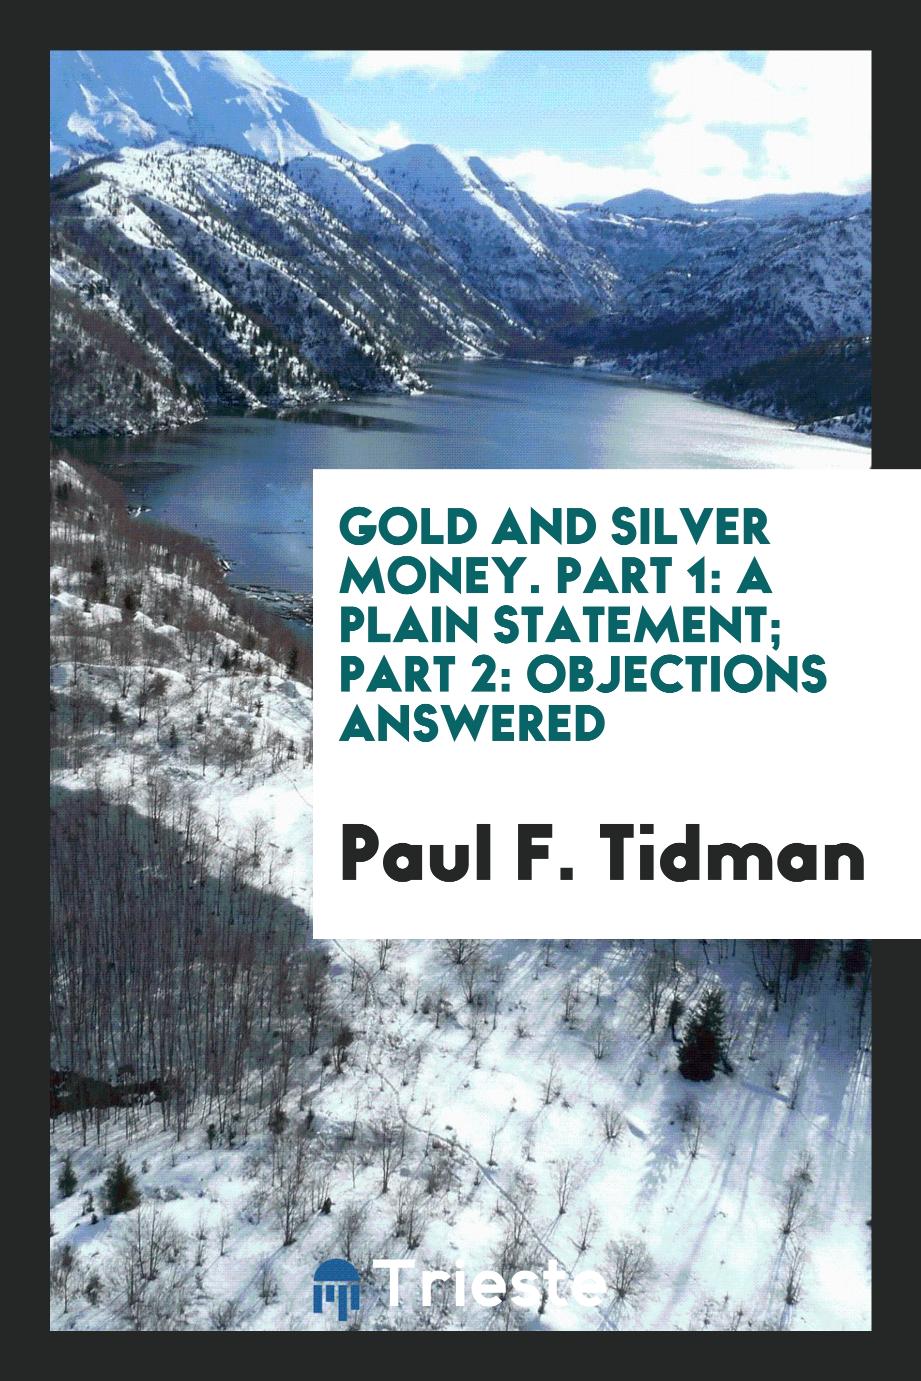 Gold and Silver Money. Part 1: A Plain Statement; Part 2: Objections Answered